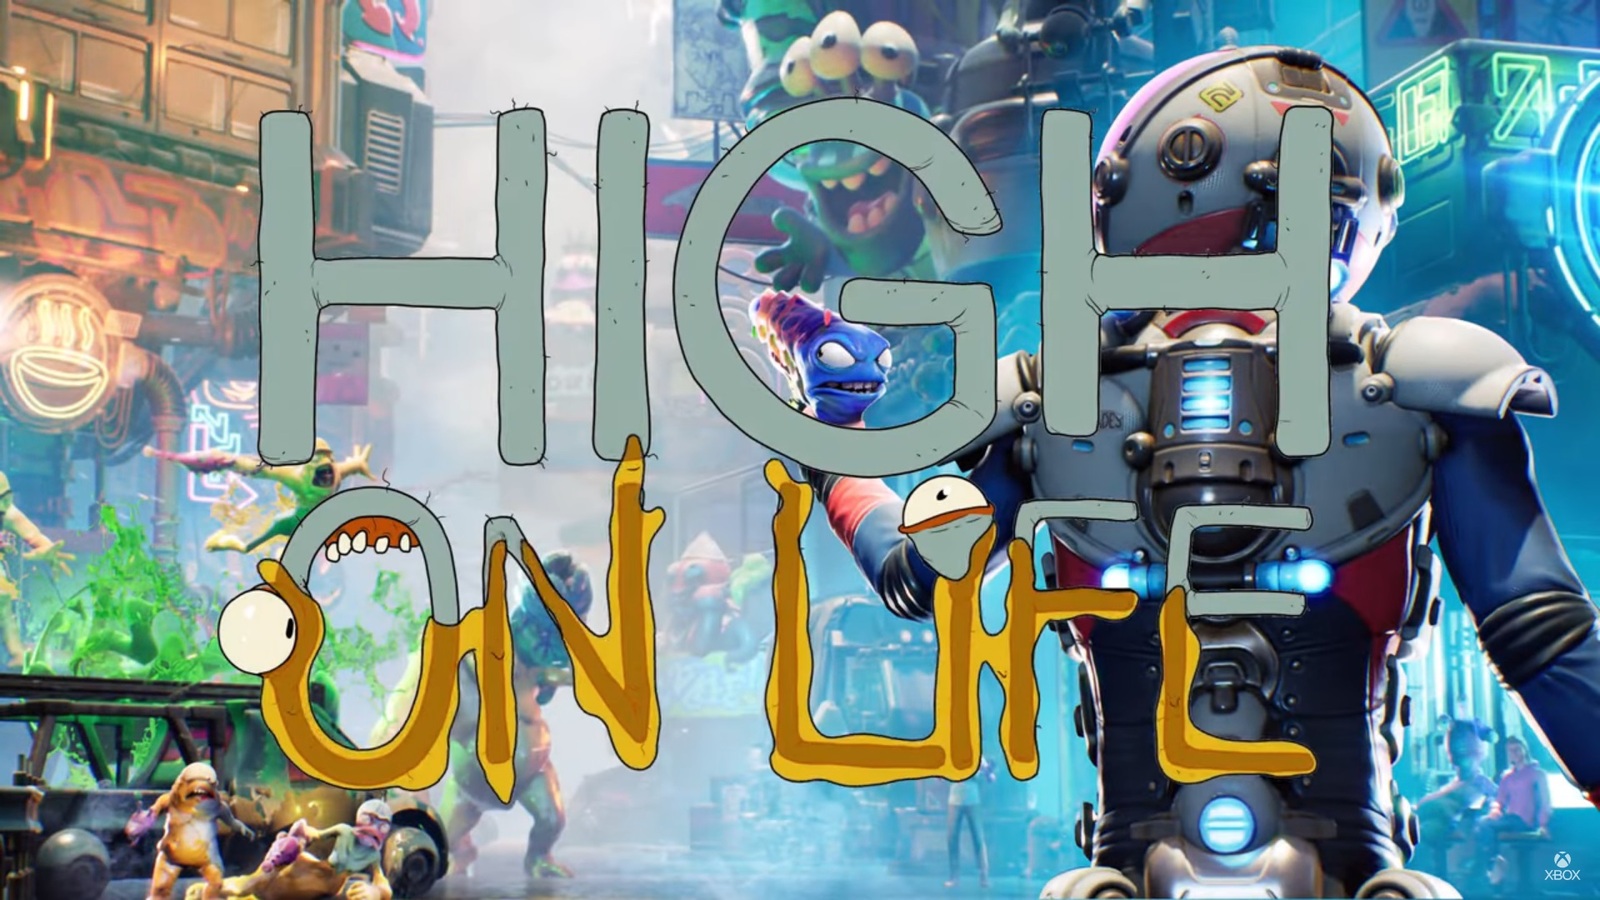 High On Life' developer confirms DLC and post-launch plans